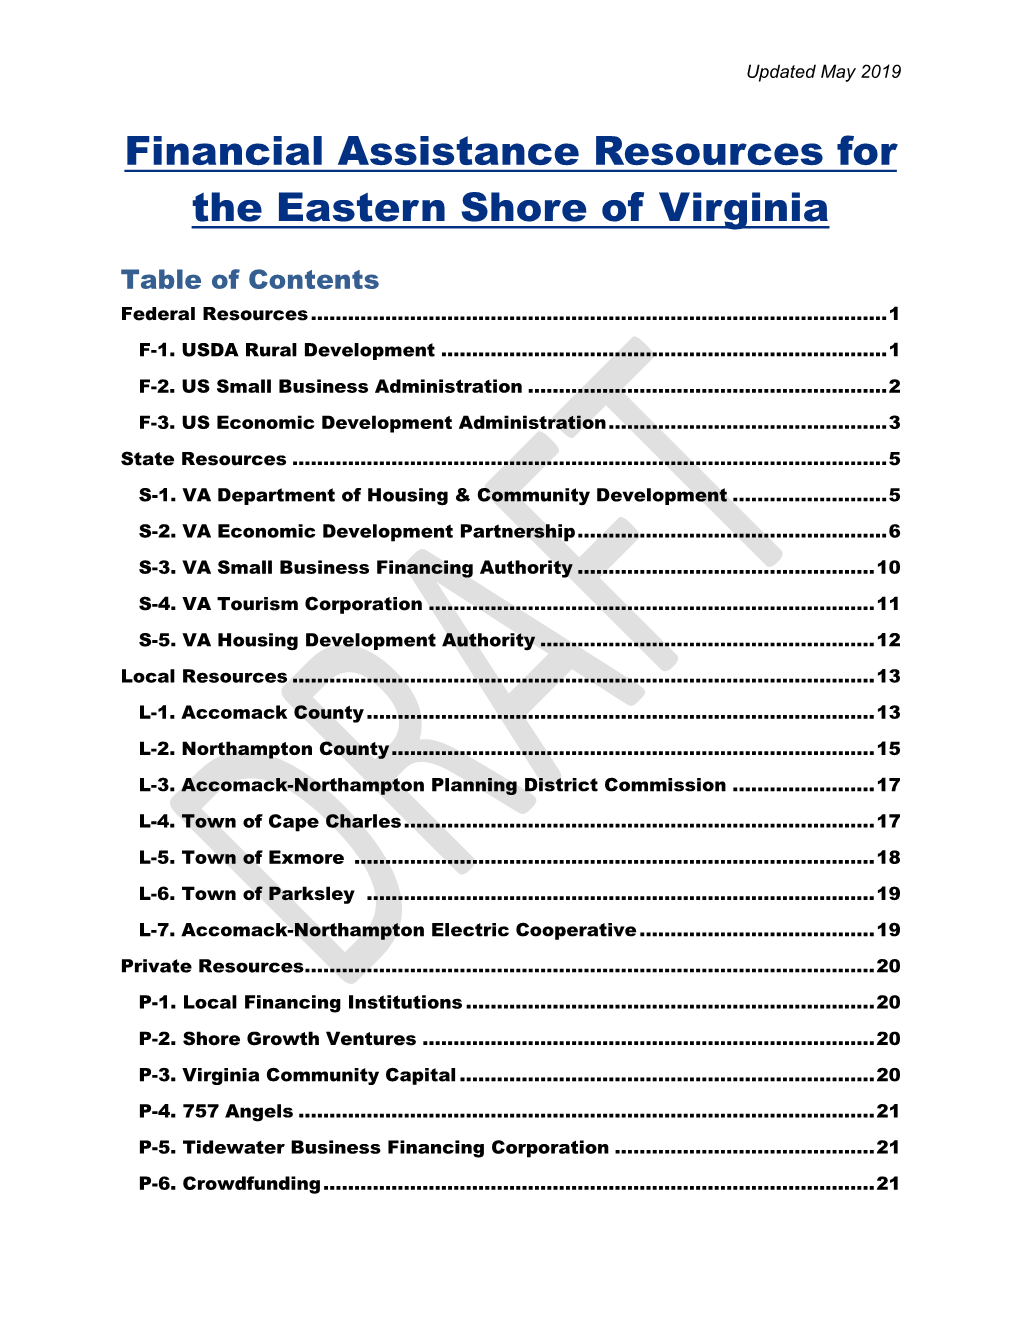 Financial Assistance Resources for the Eastern Shore of Virginia